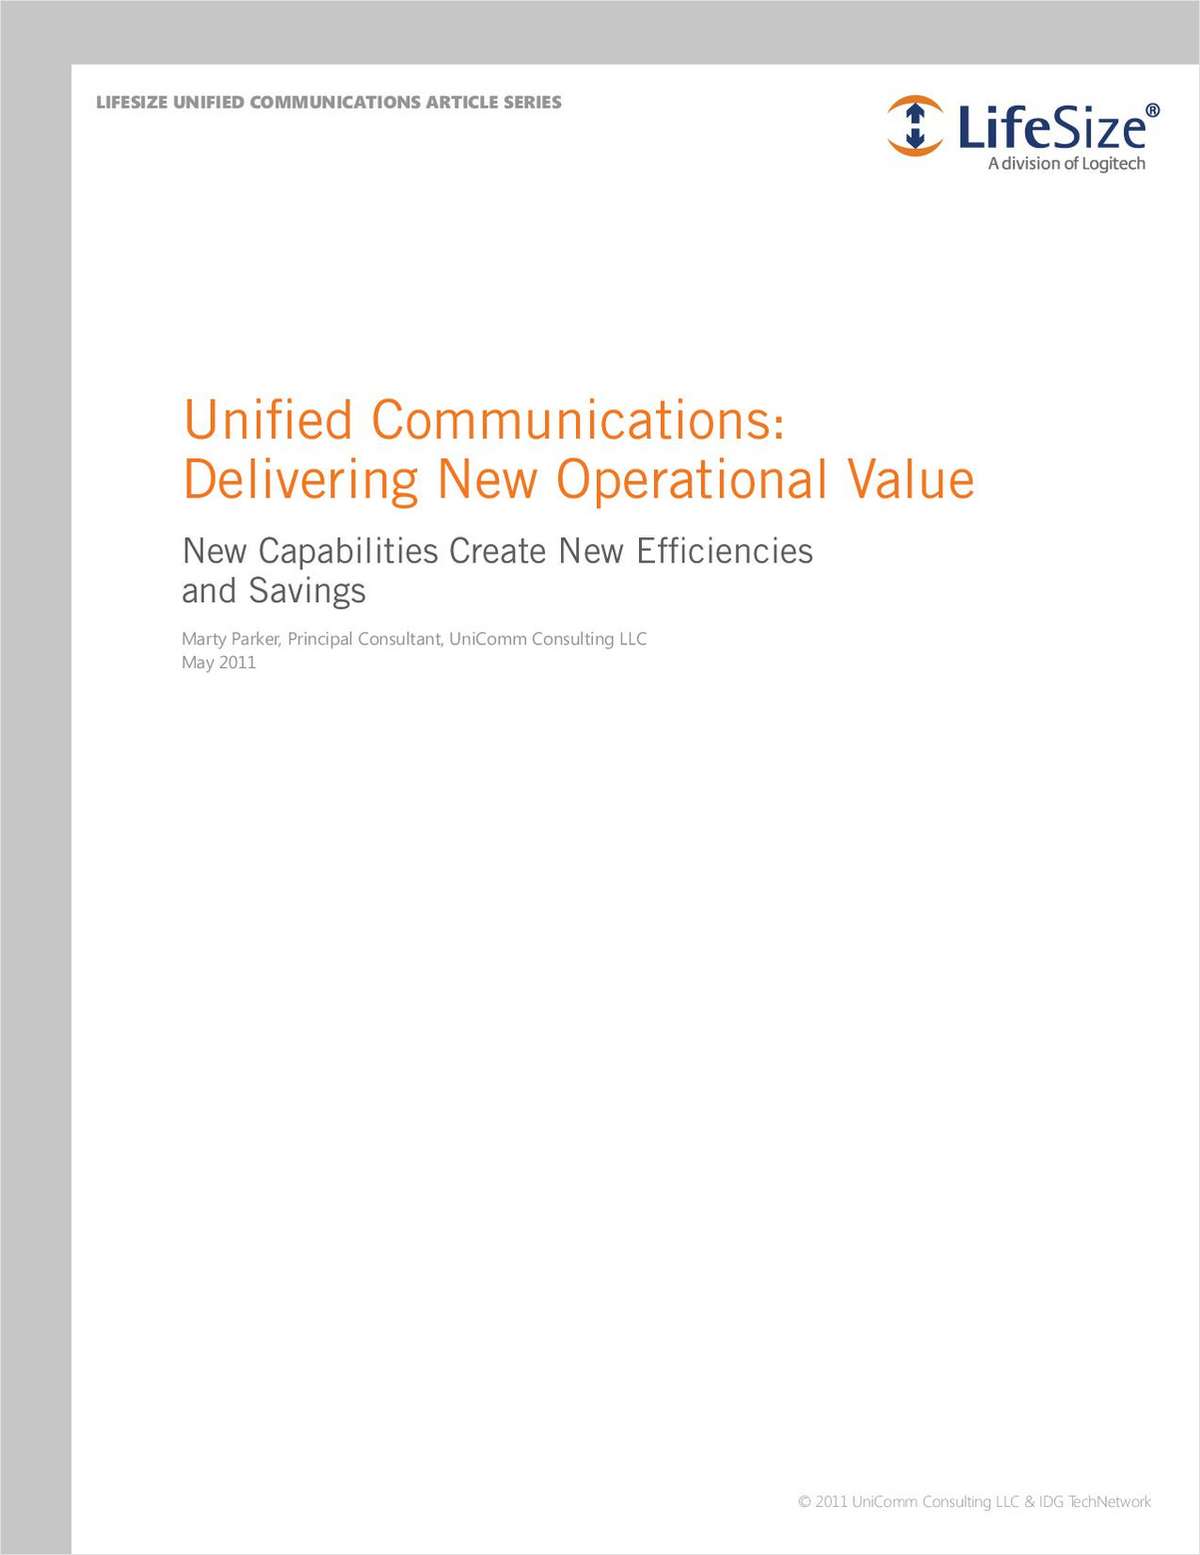 Unified Communications: Delivering New Operational Value